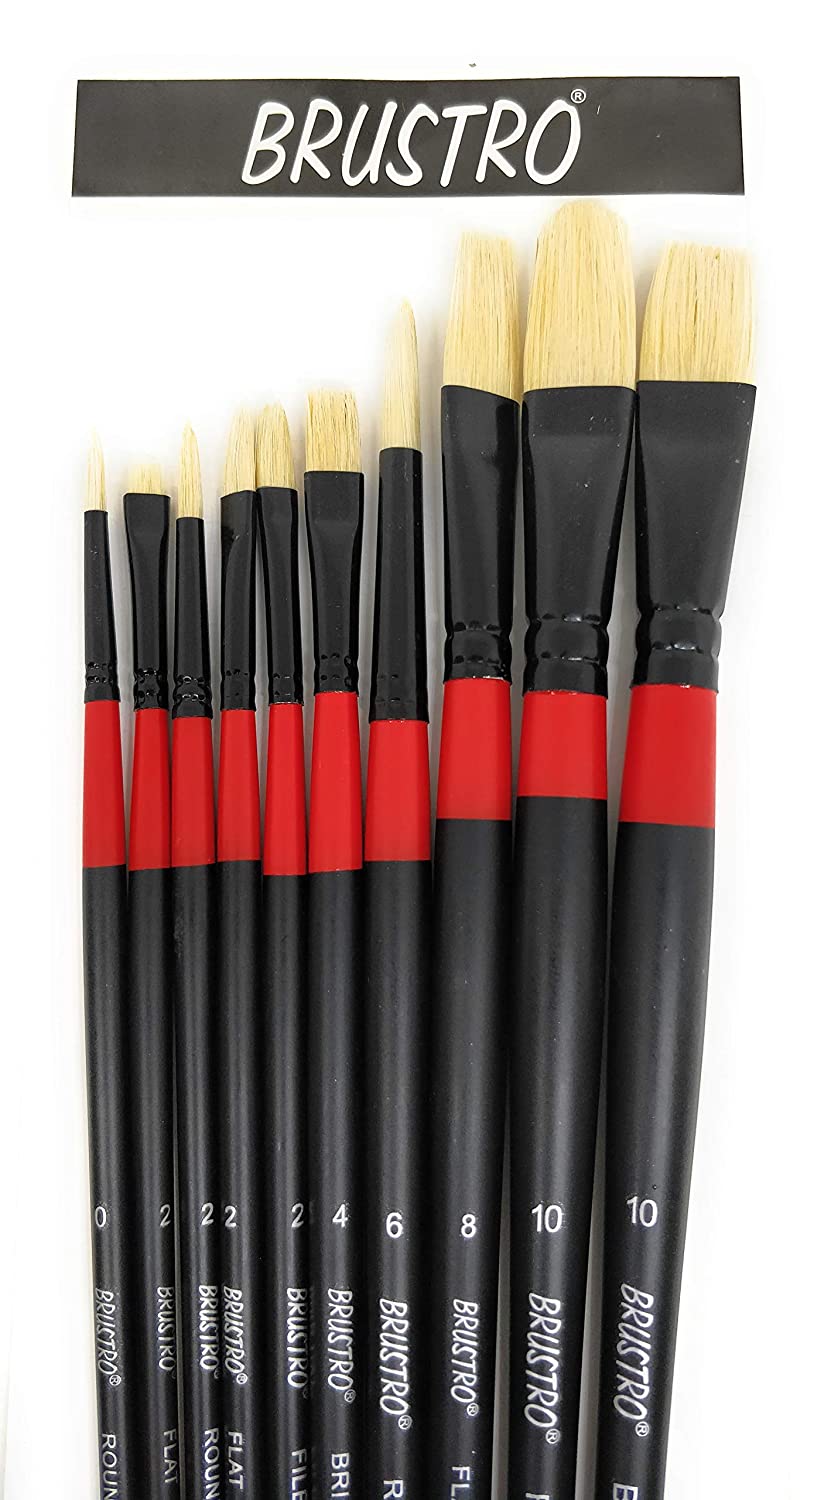 BRUSTRO Artists??? White Bristle Set of 10 Brushes for Oil and Acrylic.